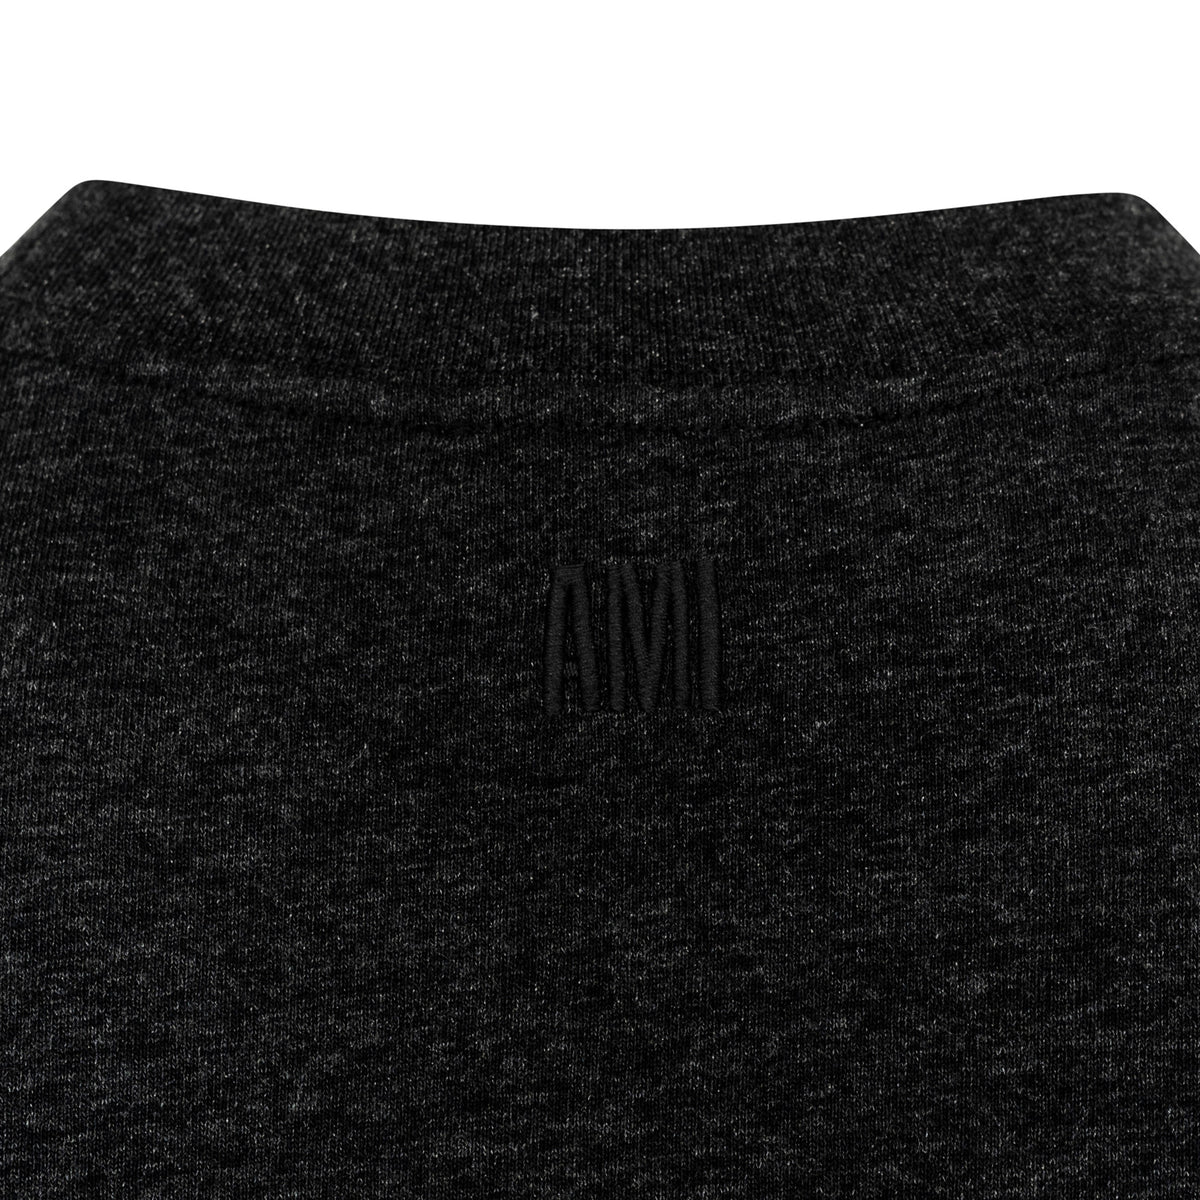 Load image into Gallery viewer, AMI Anthracite AMI Paris Patch Tee
